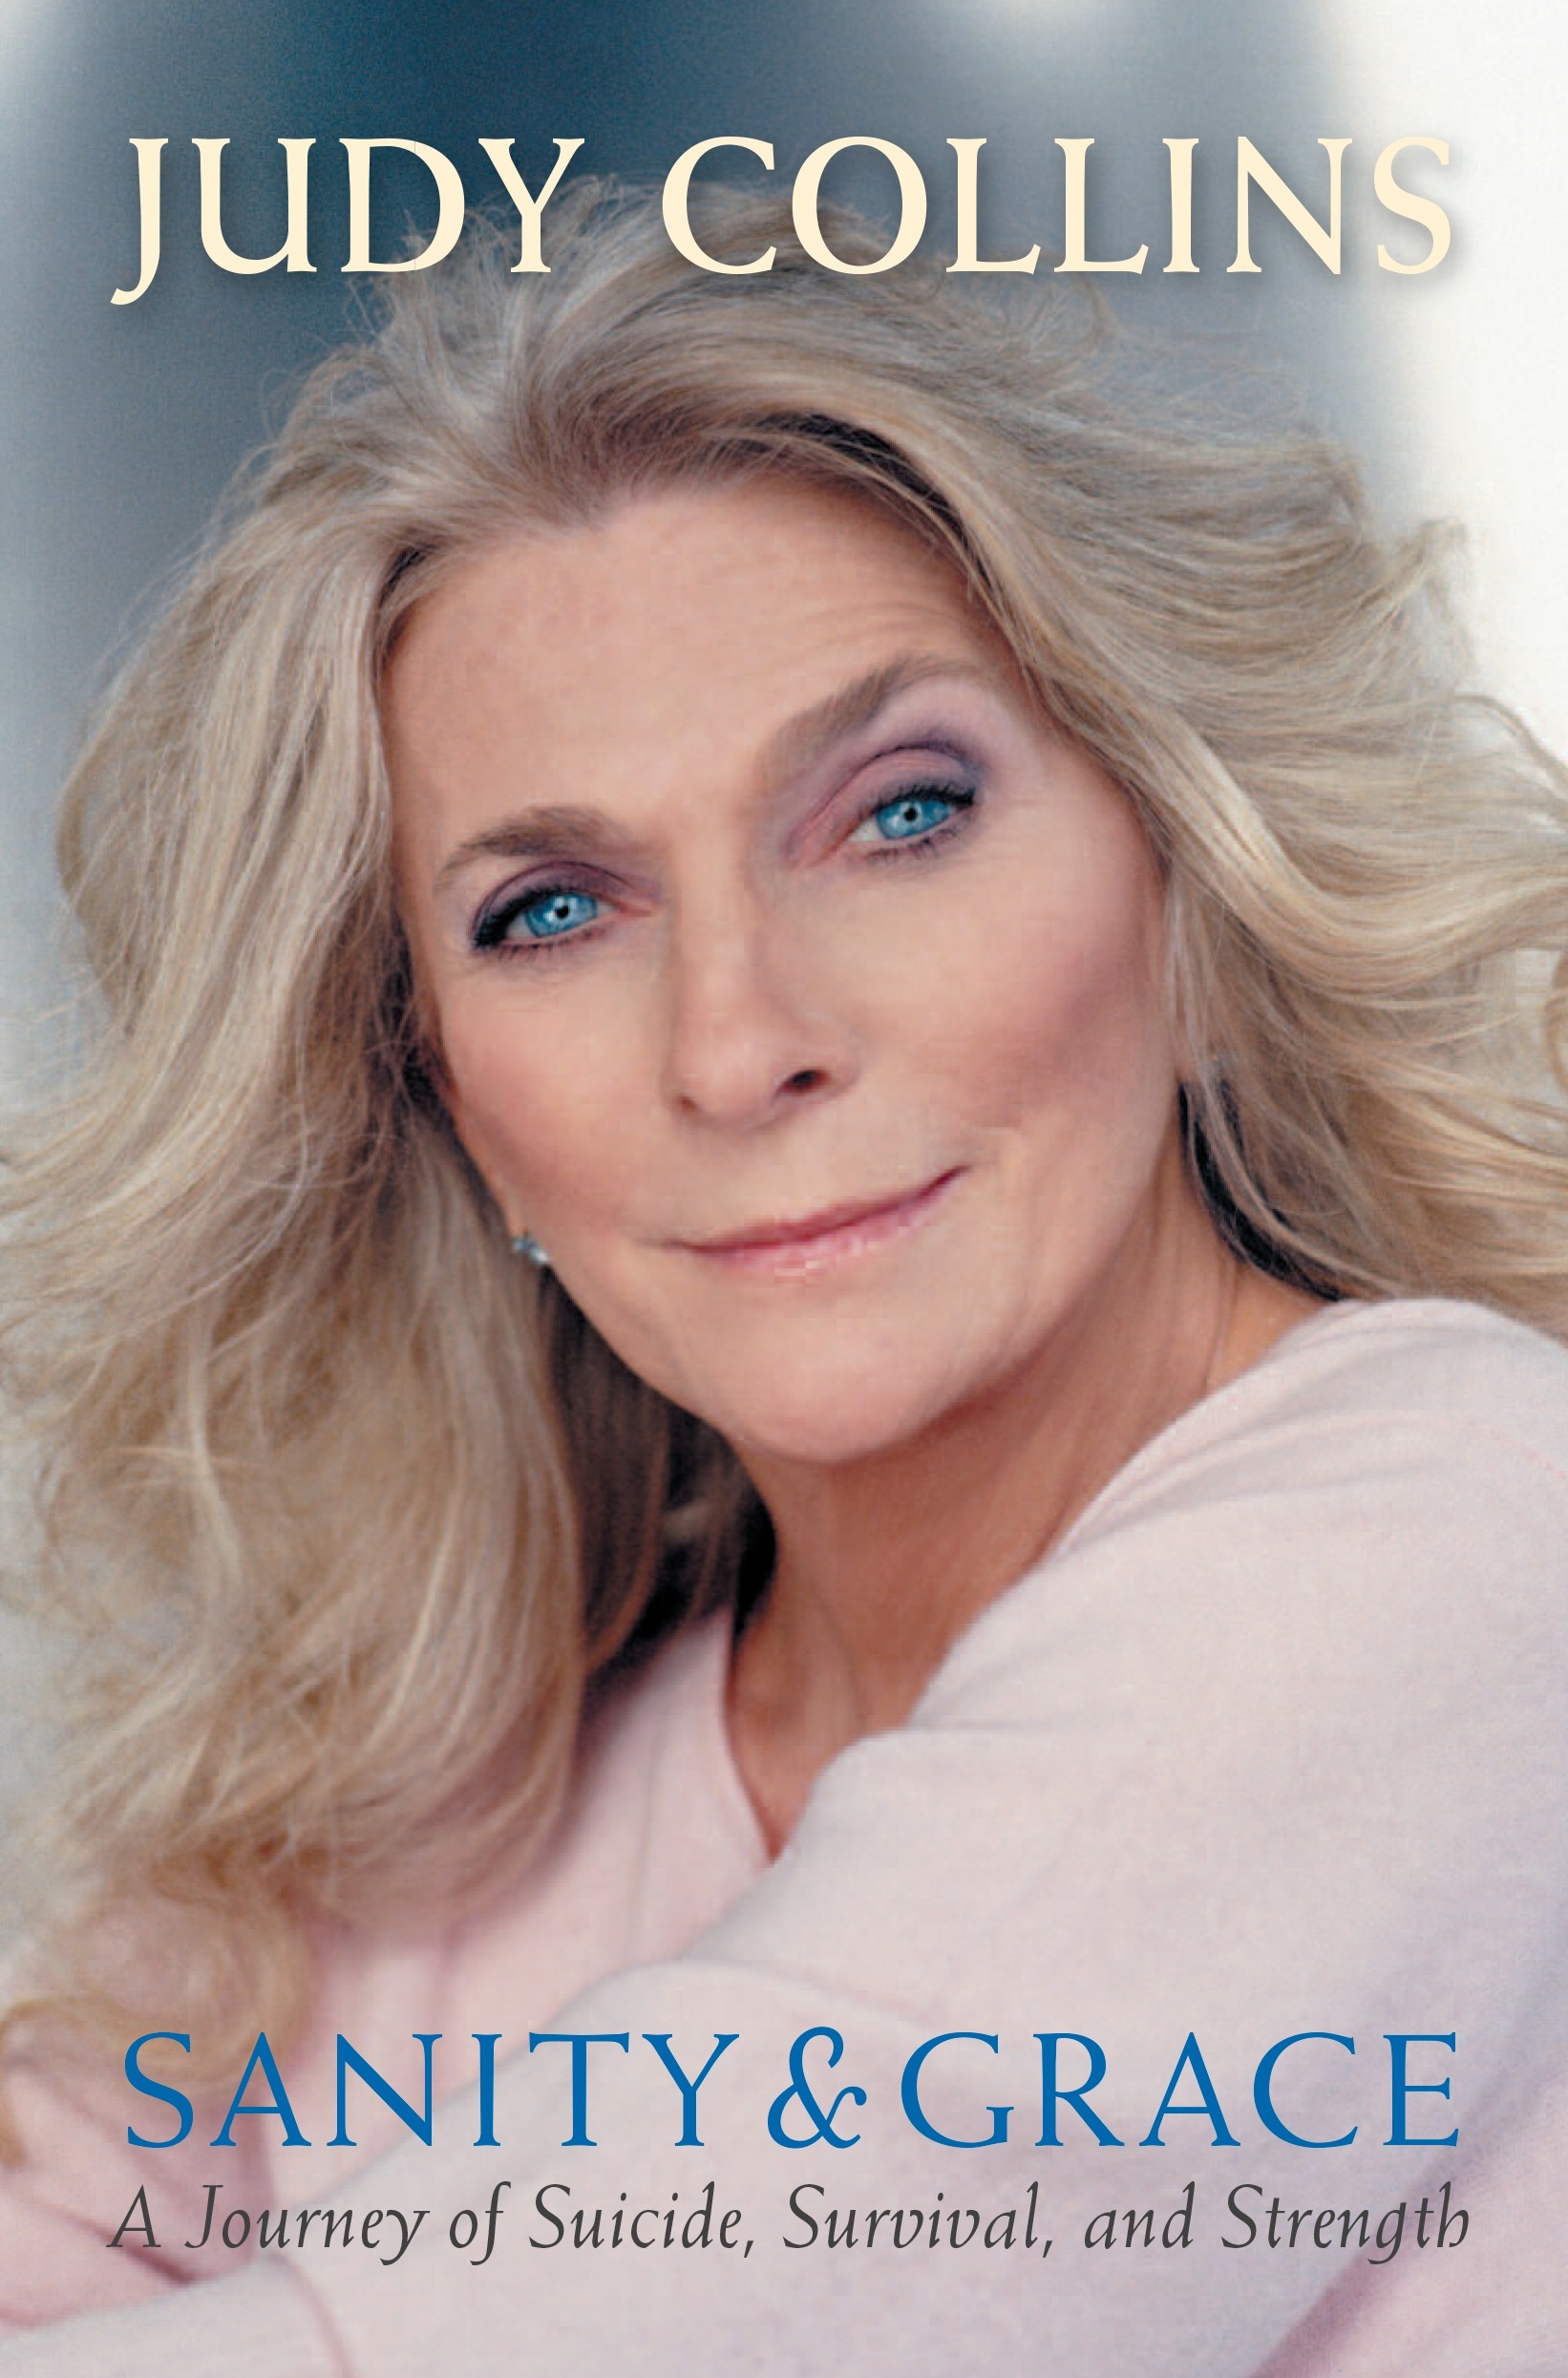 Sanity and Grace by JUDY COLLINS - Penguin Books Australia